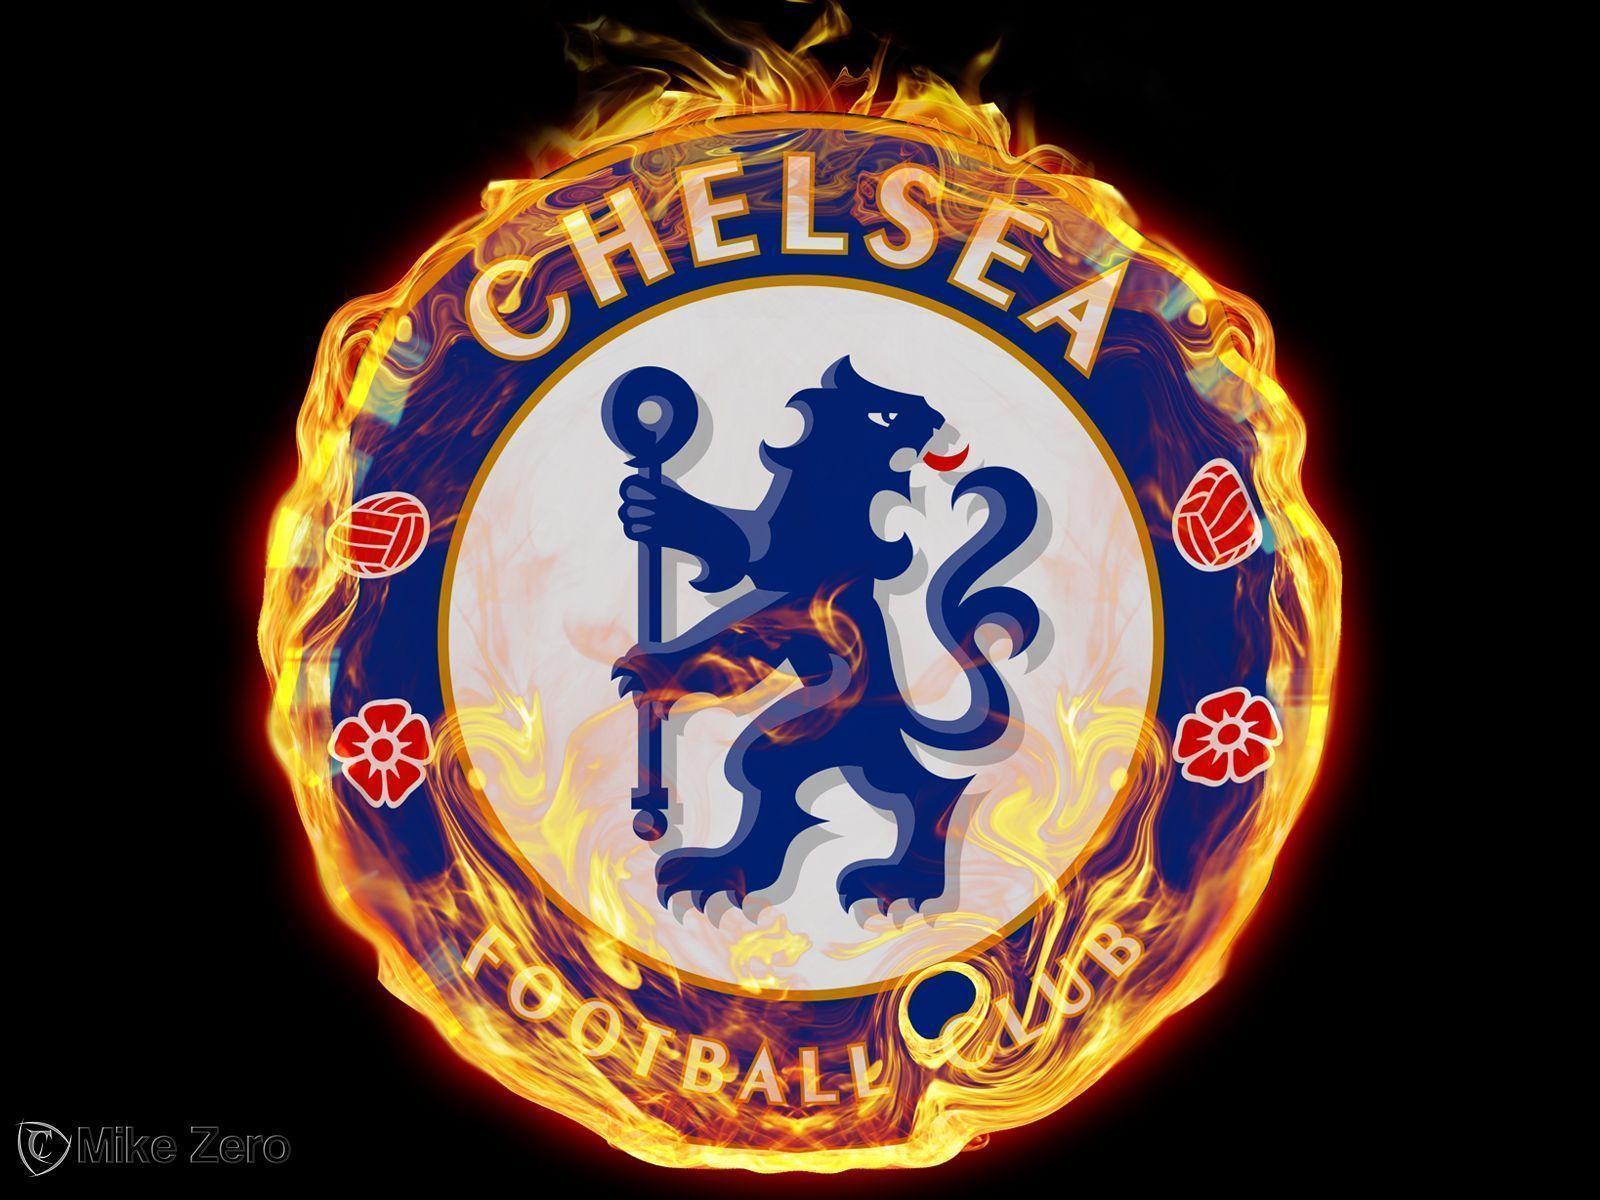 Chelsea F.C. Wallpaper and Windows 8.1 Theme. All for Windows 10 Free